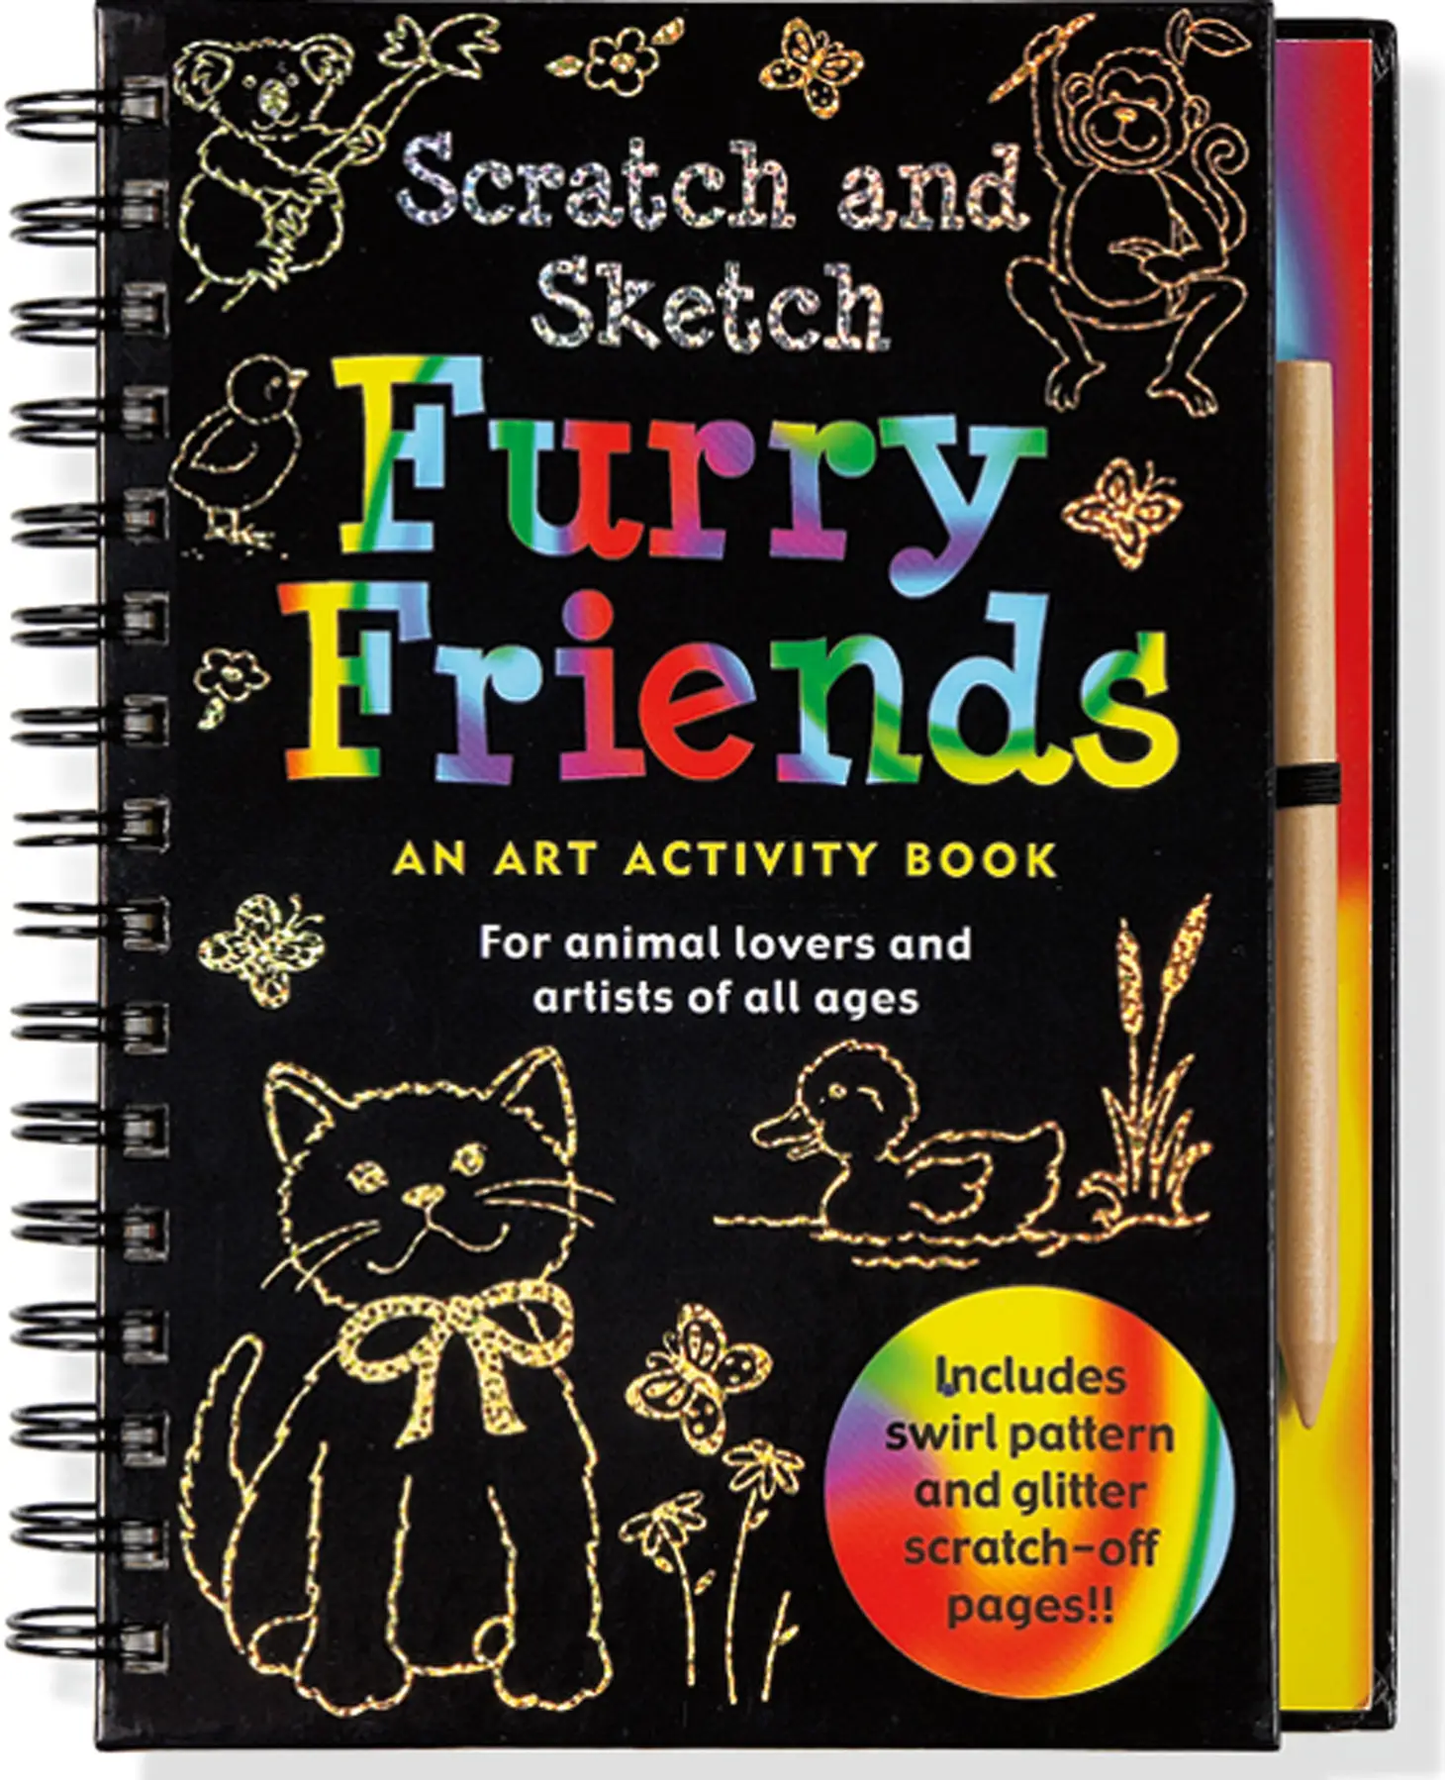 Cat Sketchbook for Kids ages 4-8 Blank Paper for Drawing.